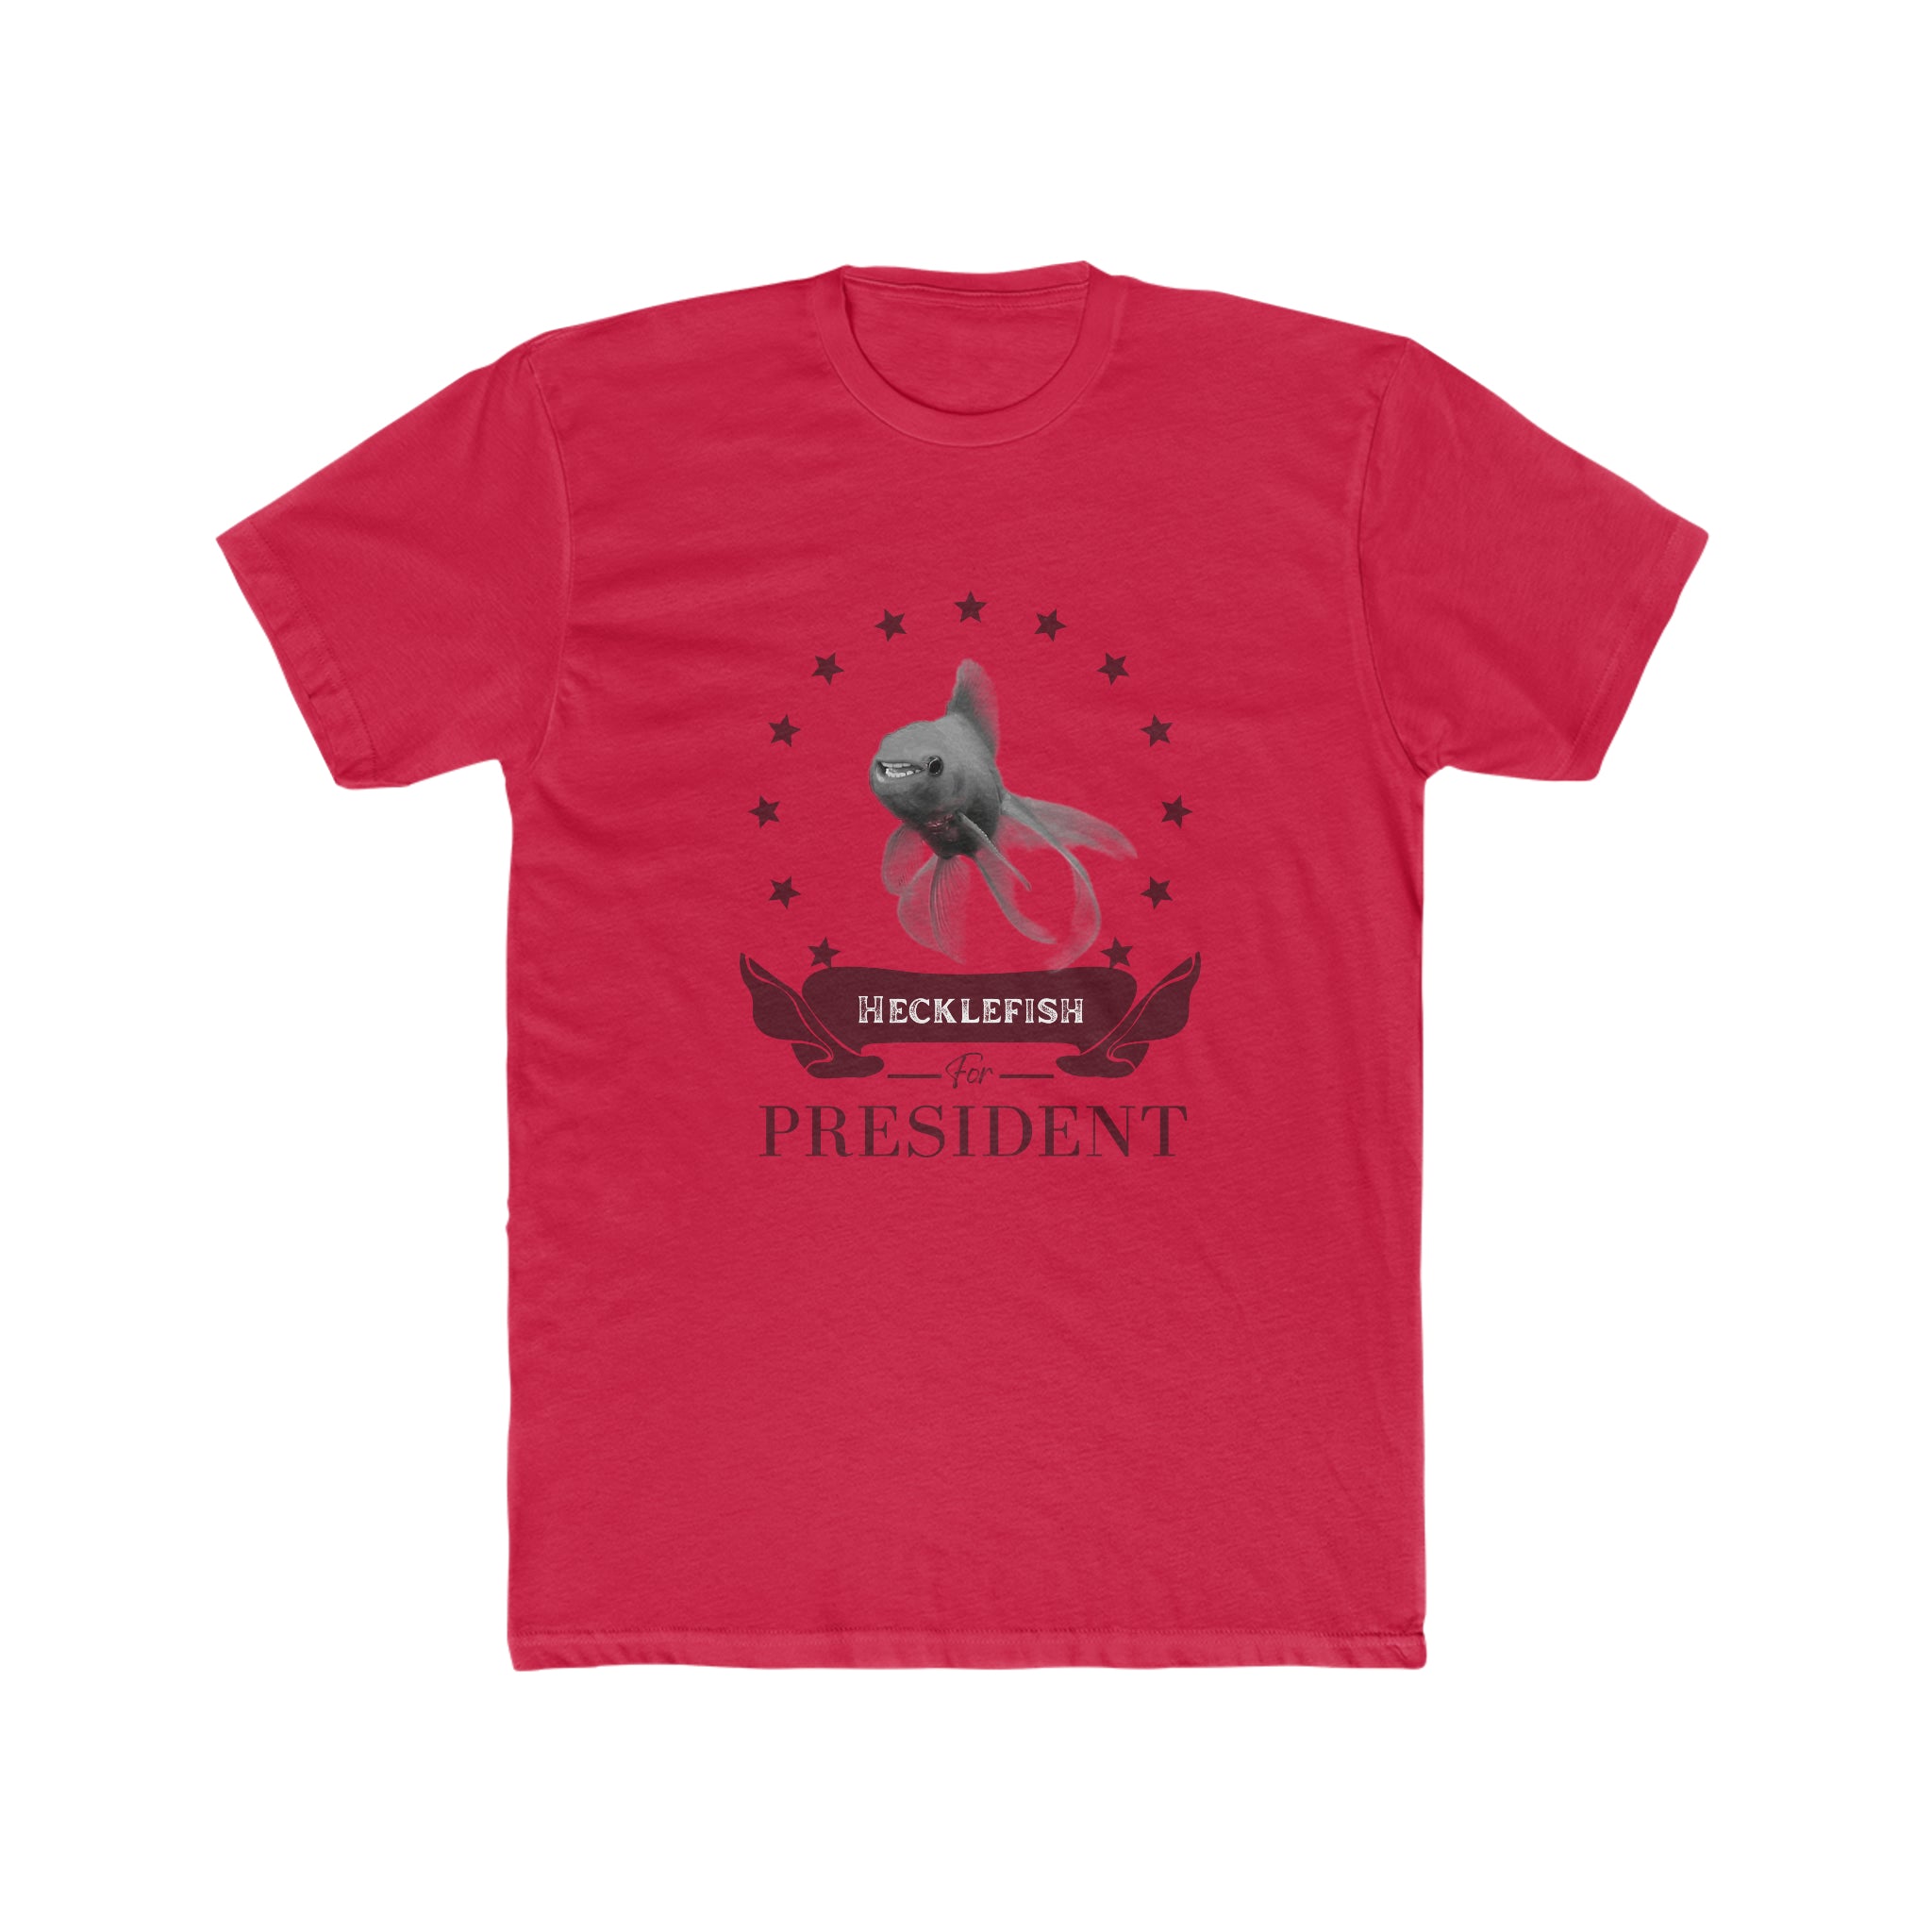 Buy solid-red Hecklefish for President Unisex T-Shirt